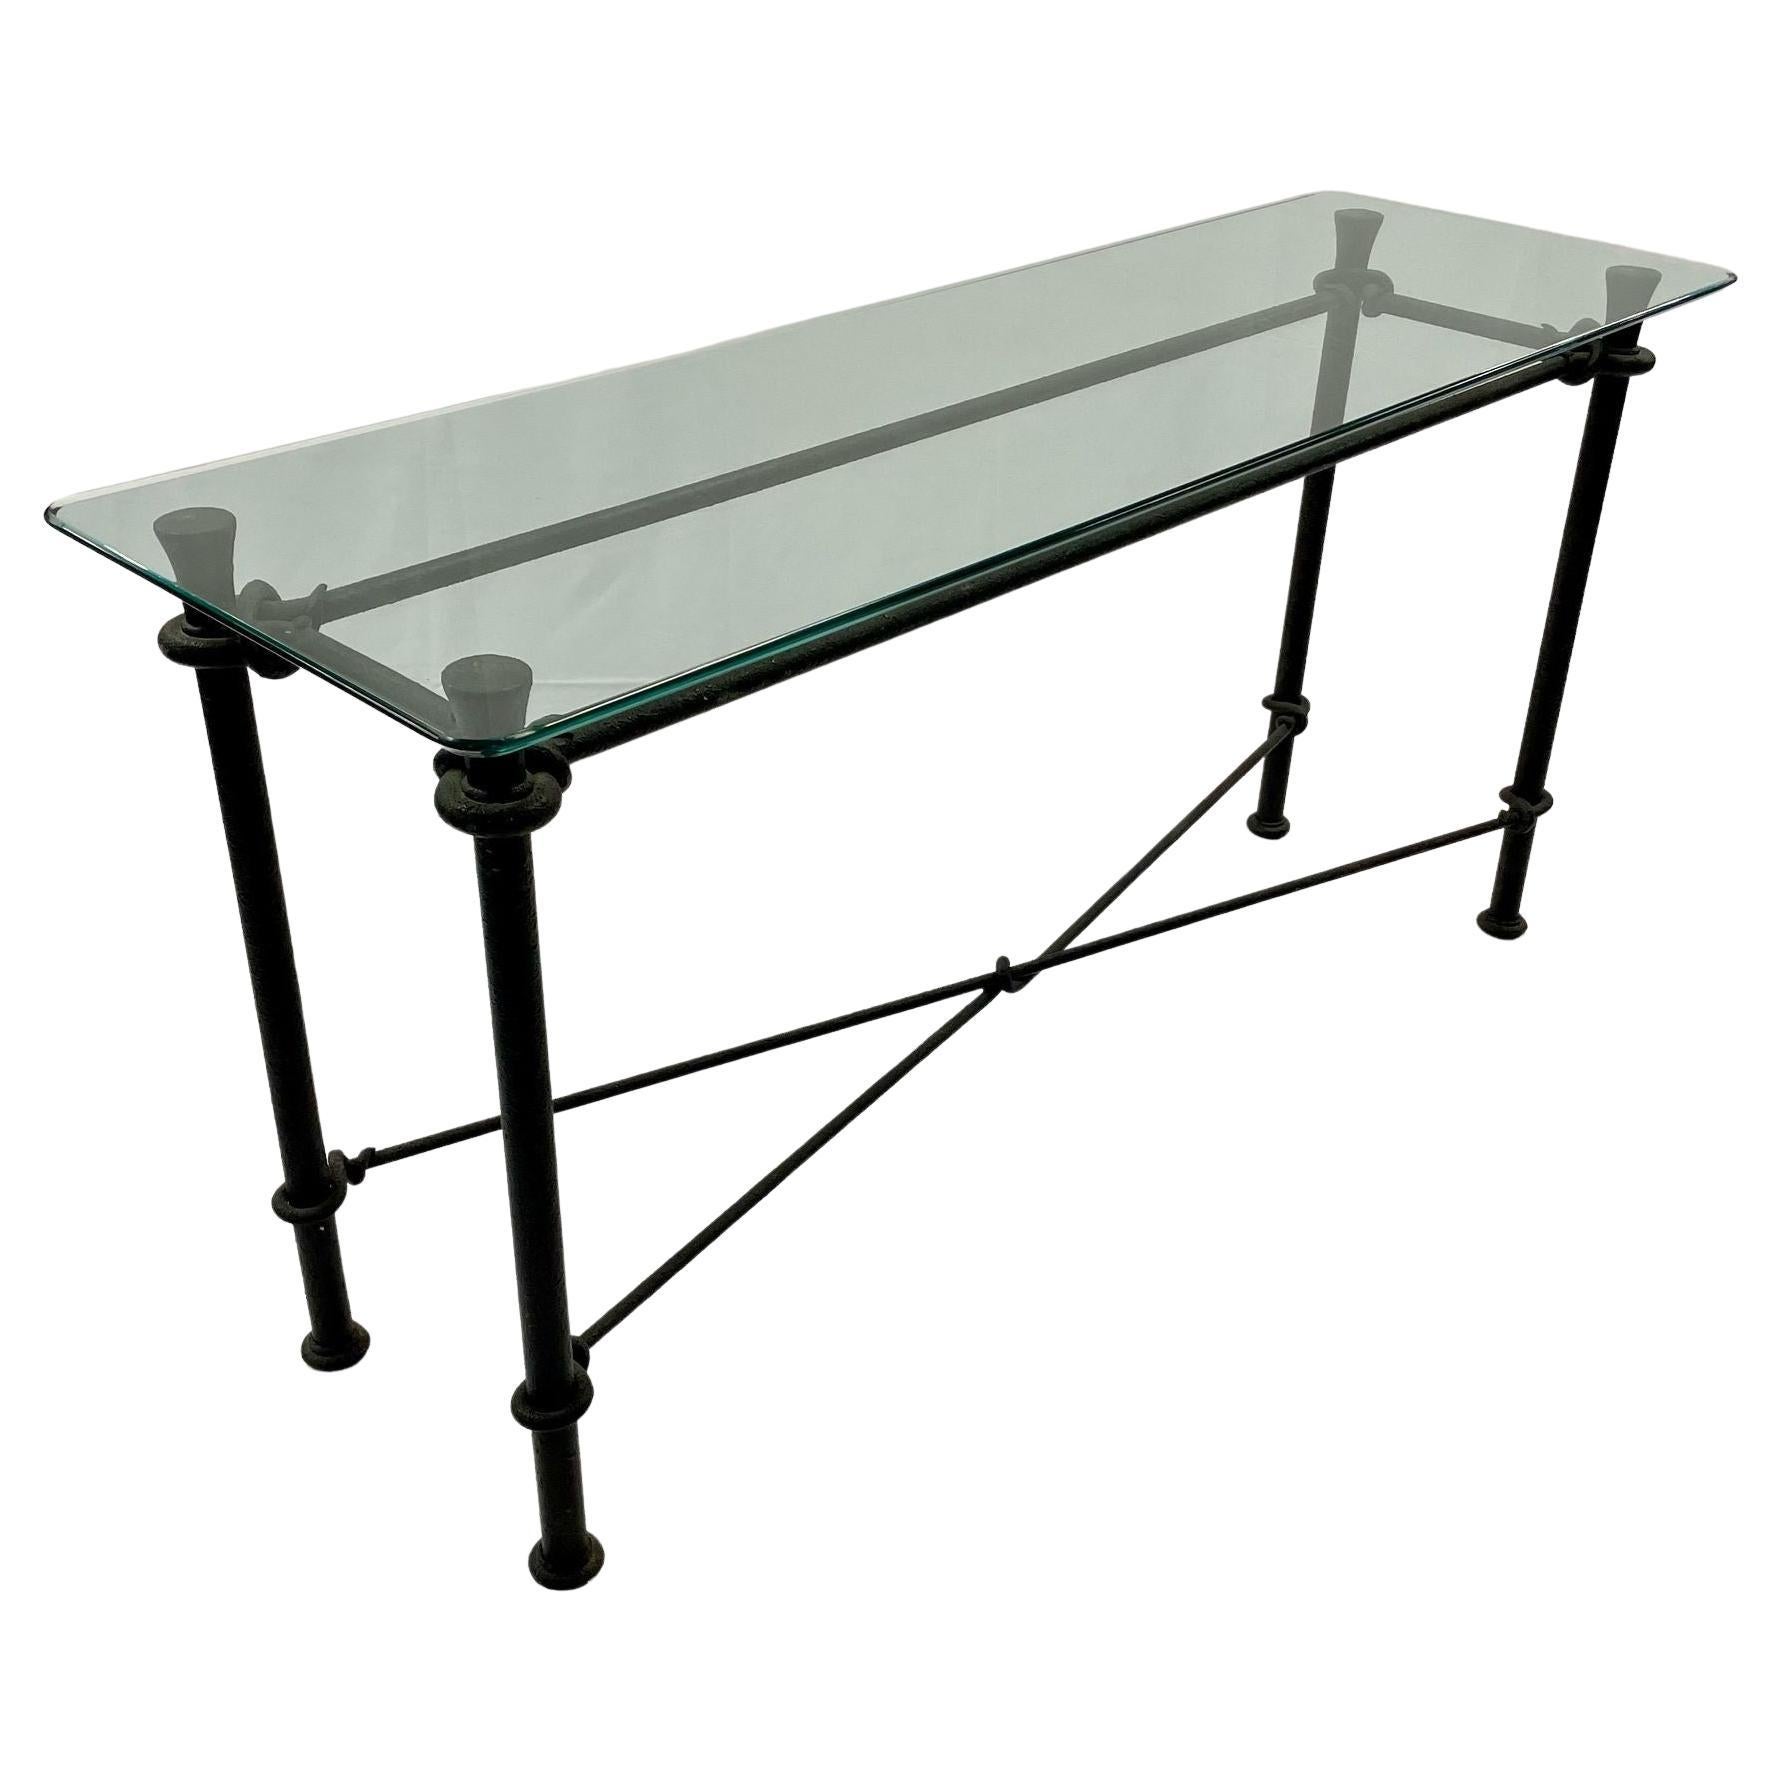 Mid-Century Modern Giacometti Style Console / Sofa Table, Wrought Iron Glass Top